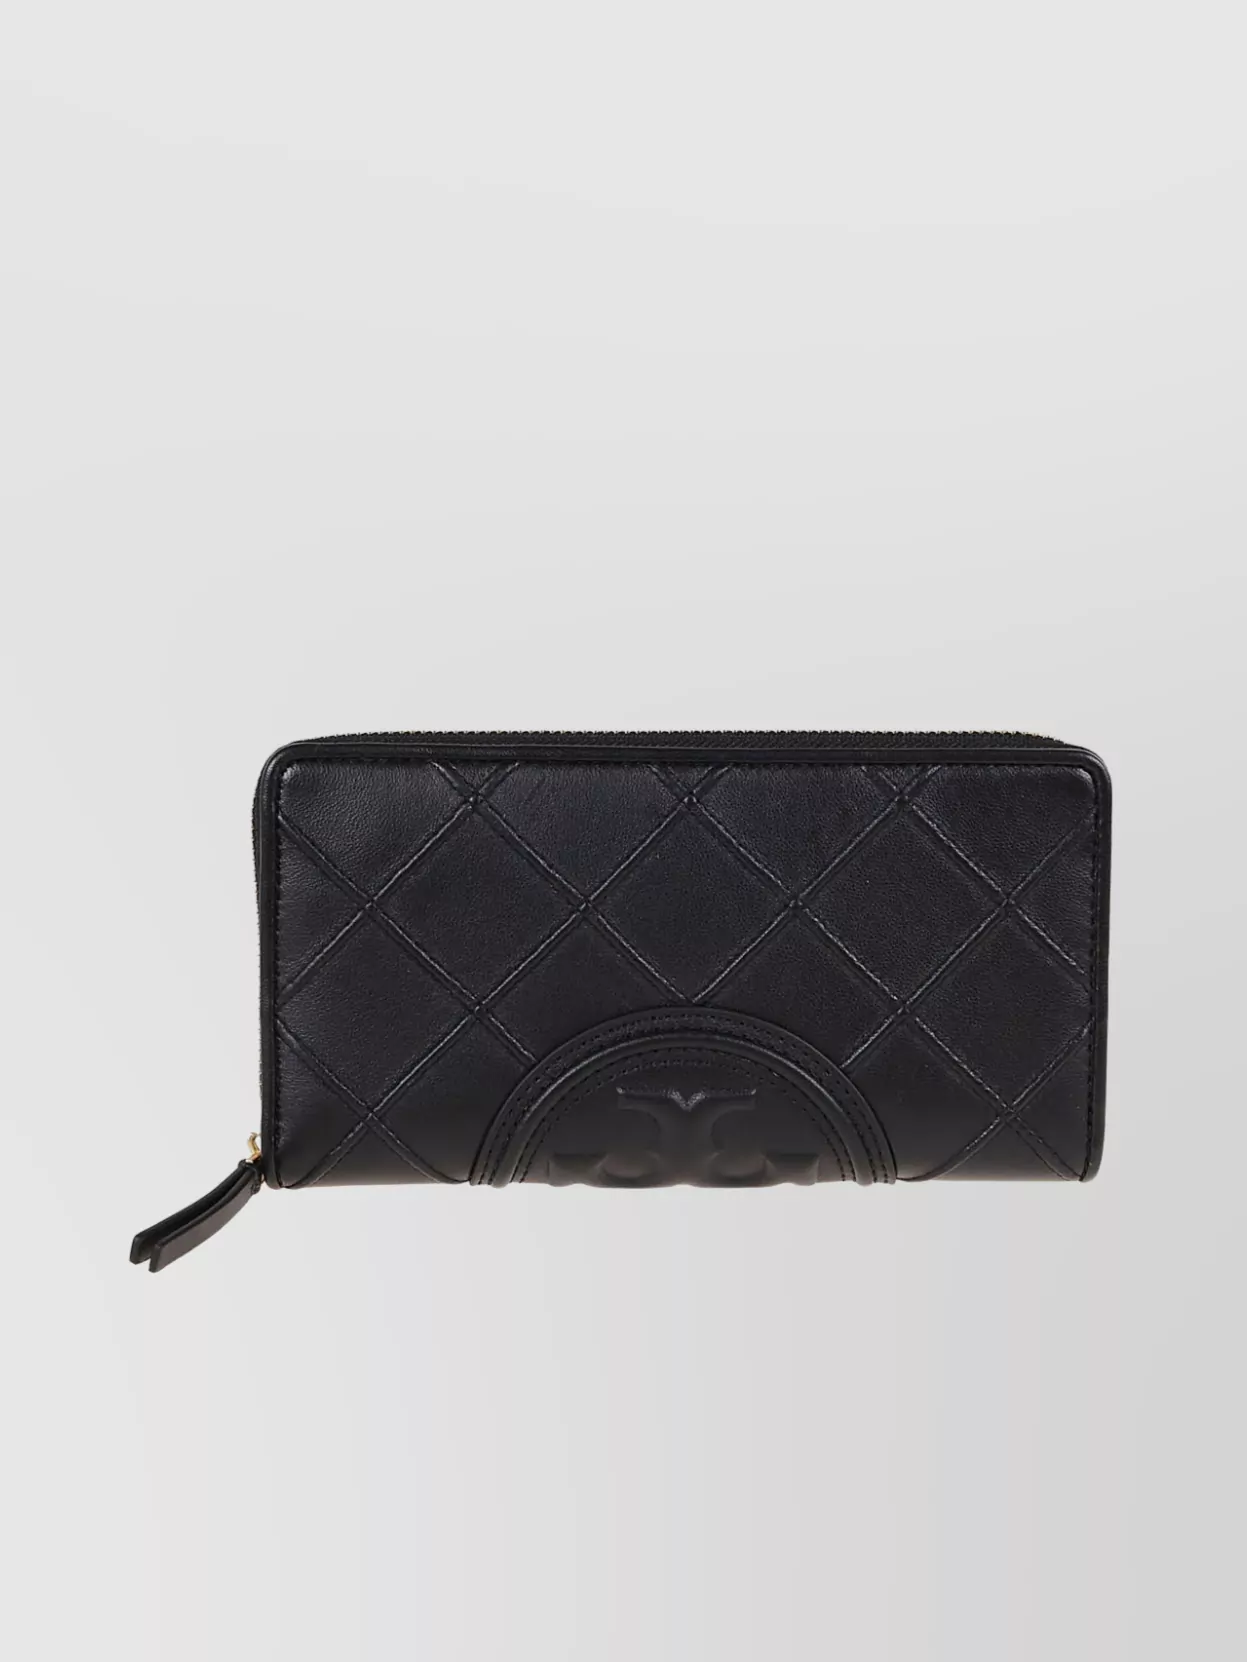 Tory Burch Fleming Soft Zip Continental Wallet In Negro